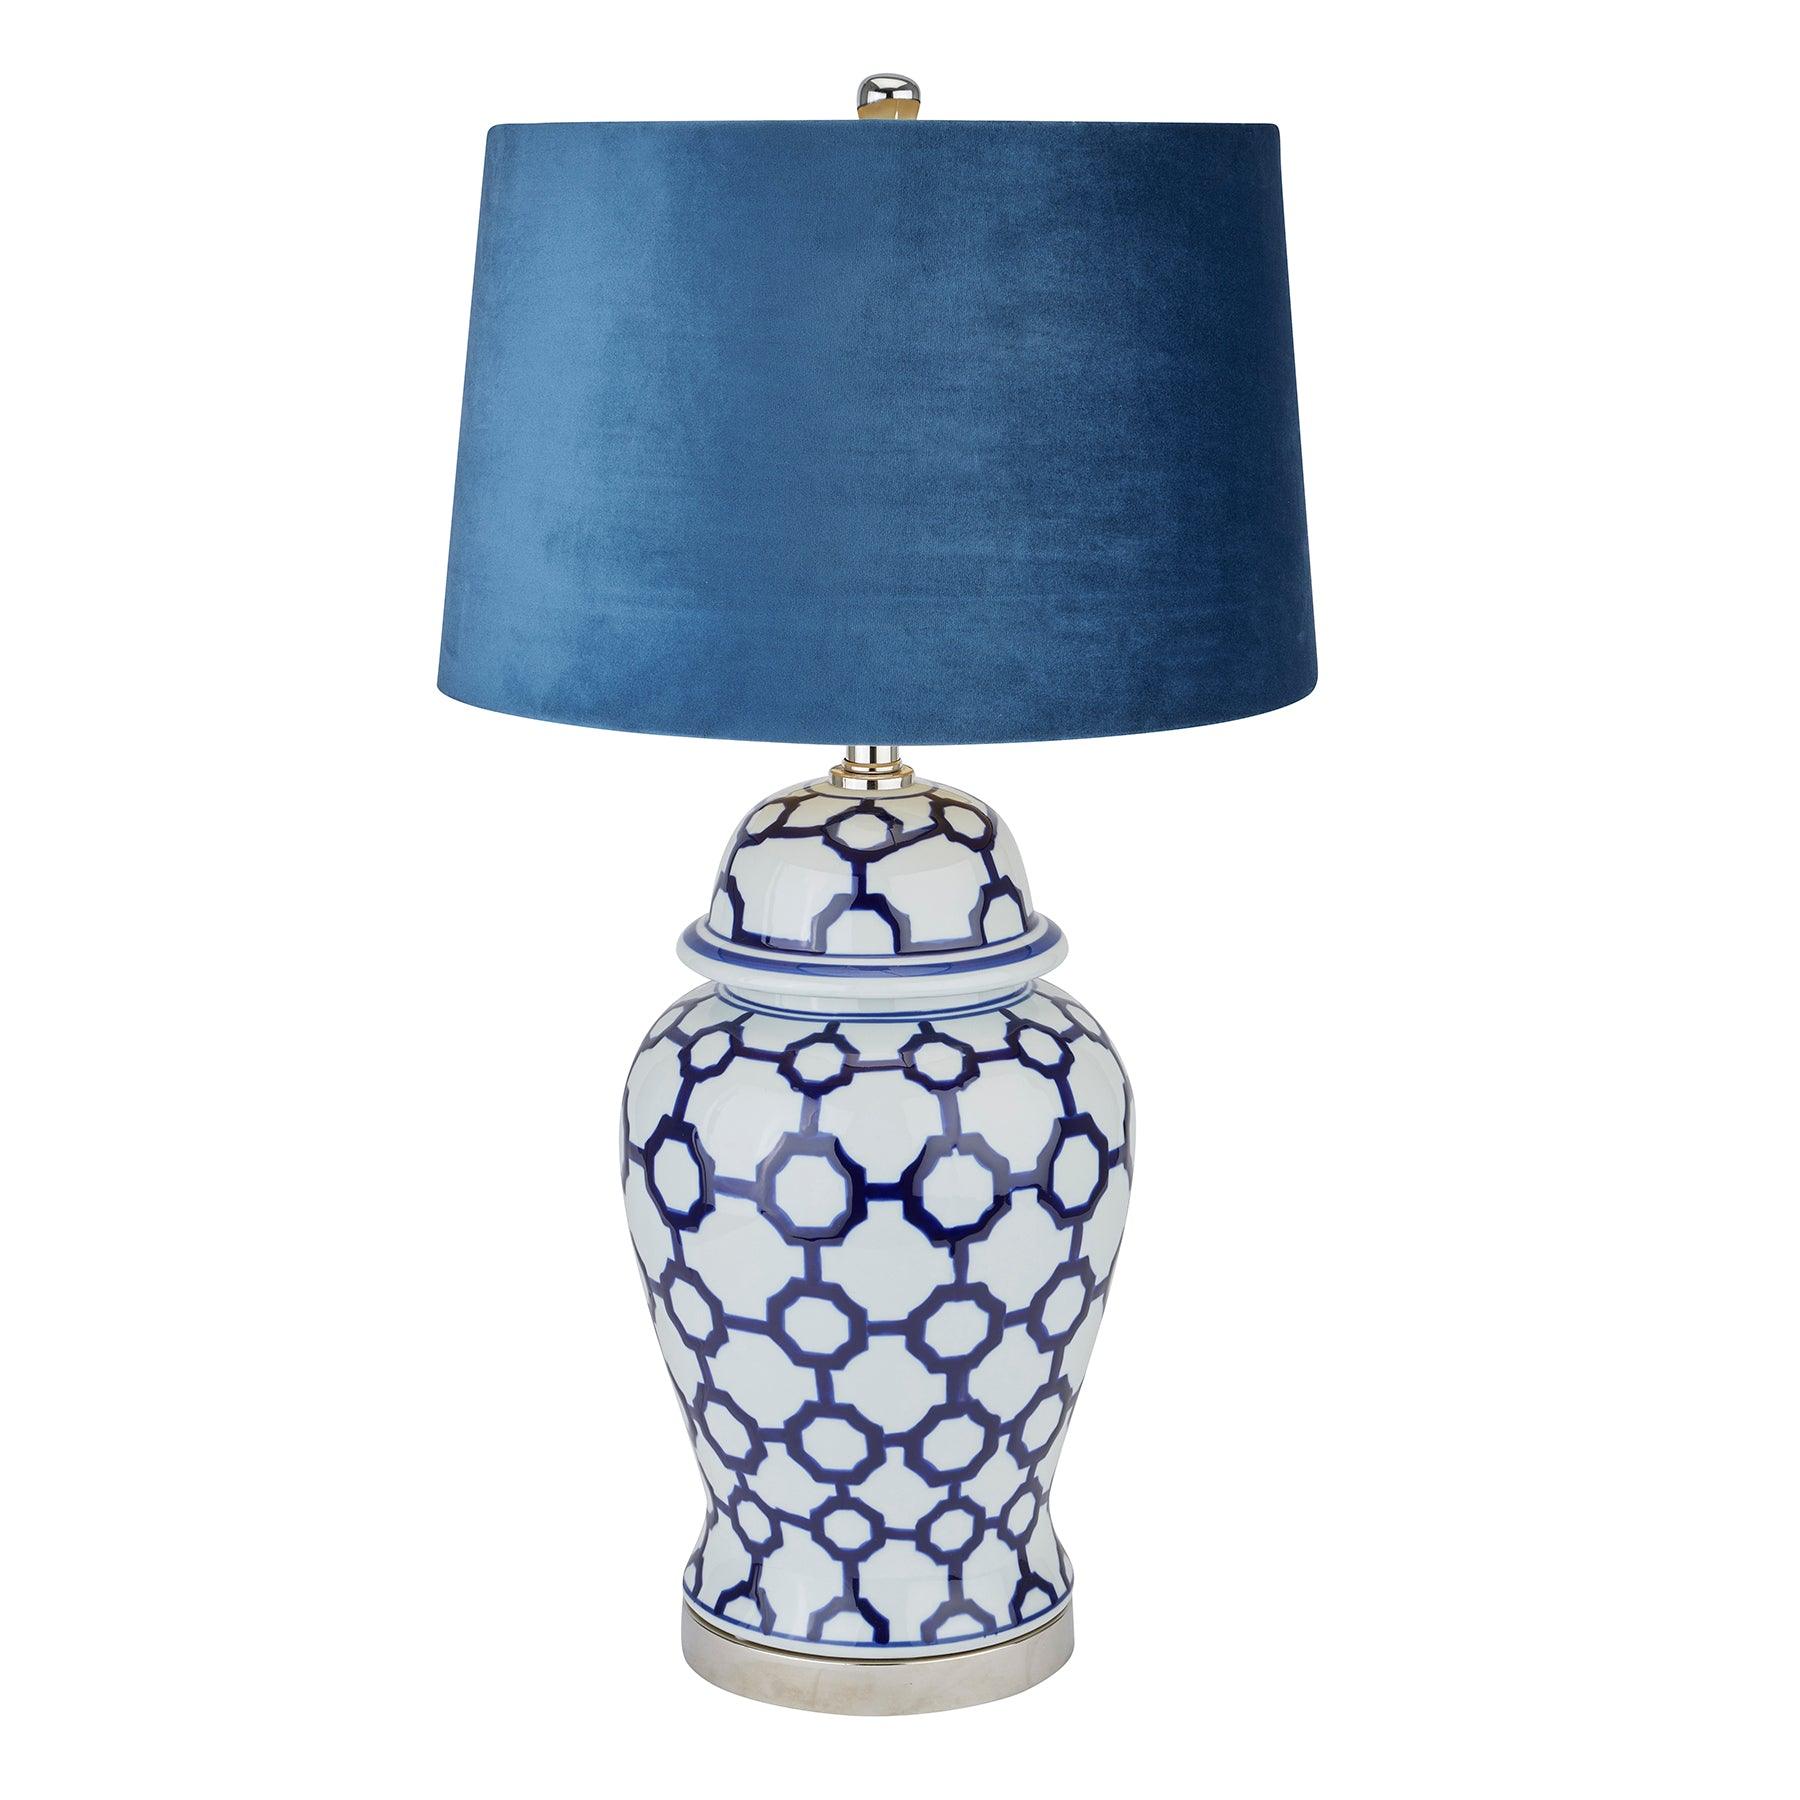 View Acanthus Blue And White Ceramic Lamp With Blue Velvet Shade information